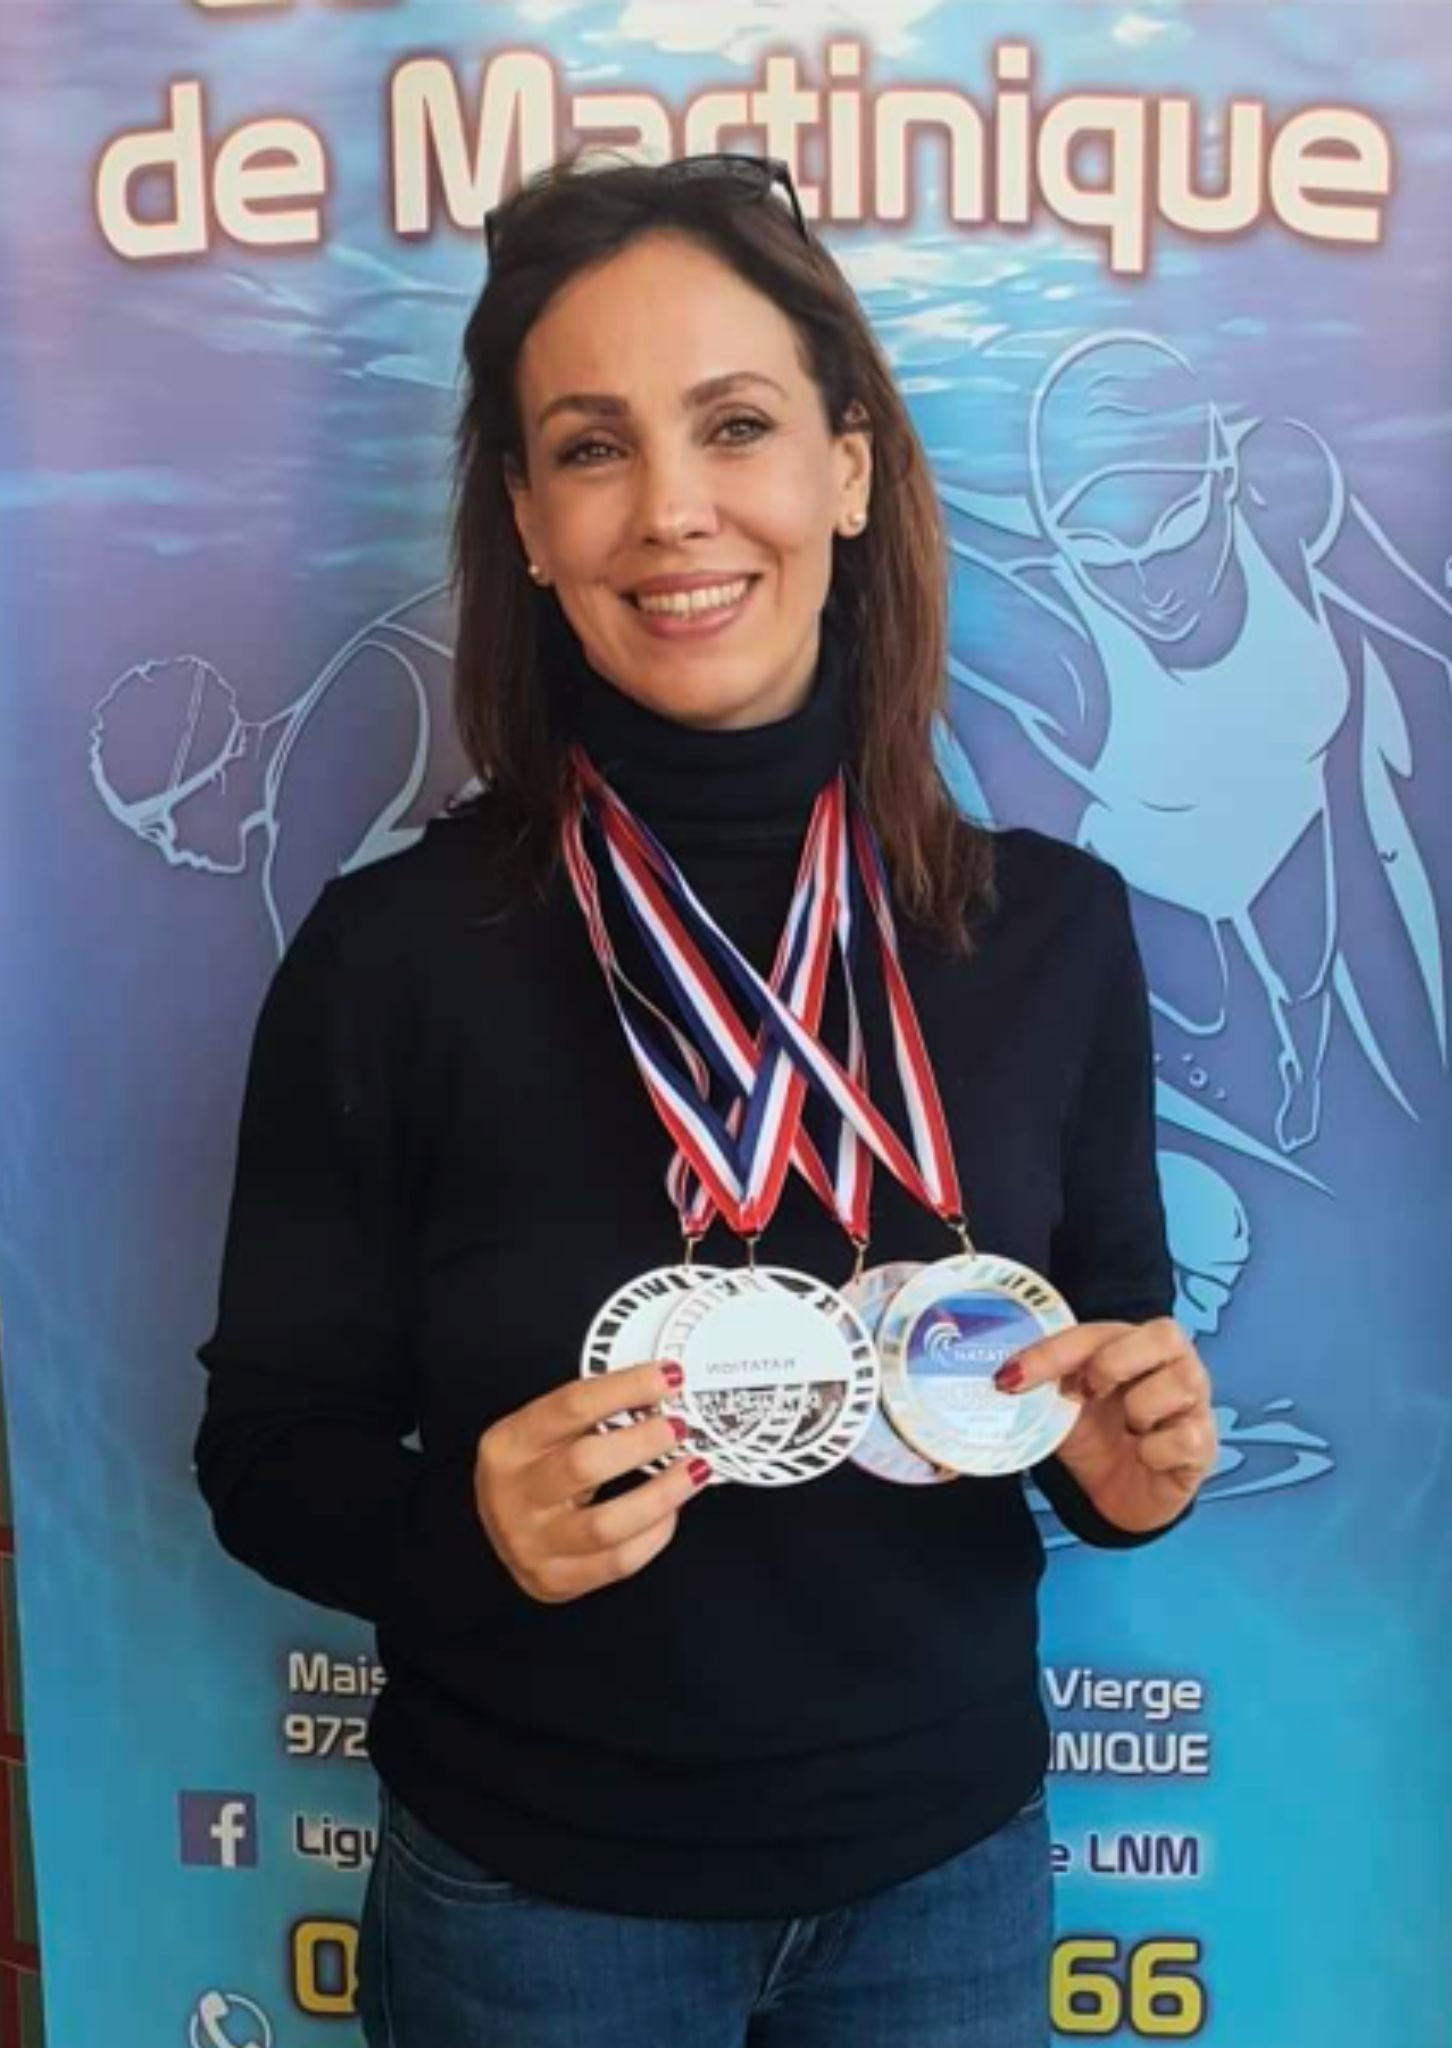 51-year-old Masters swimmer Leila competing in the US Masters.